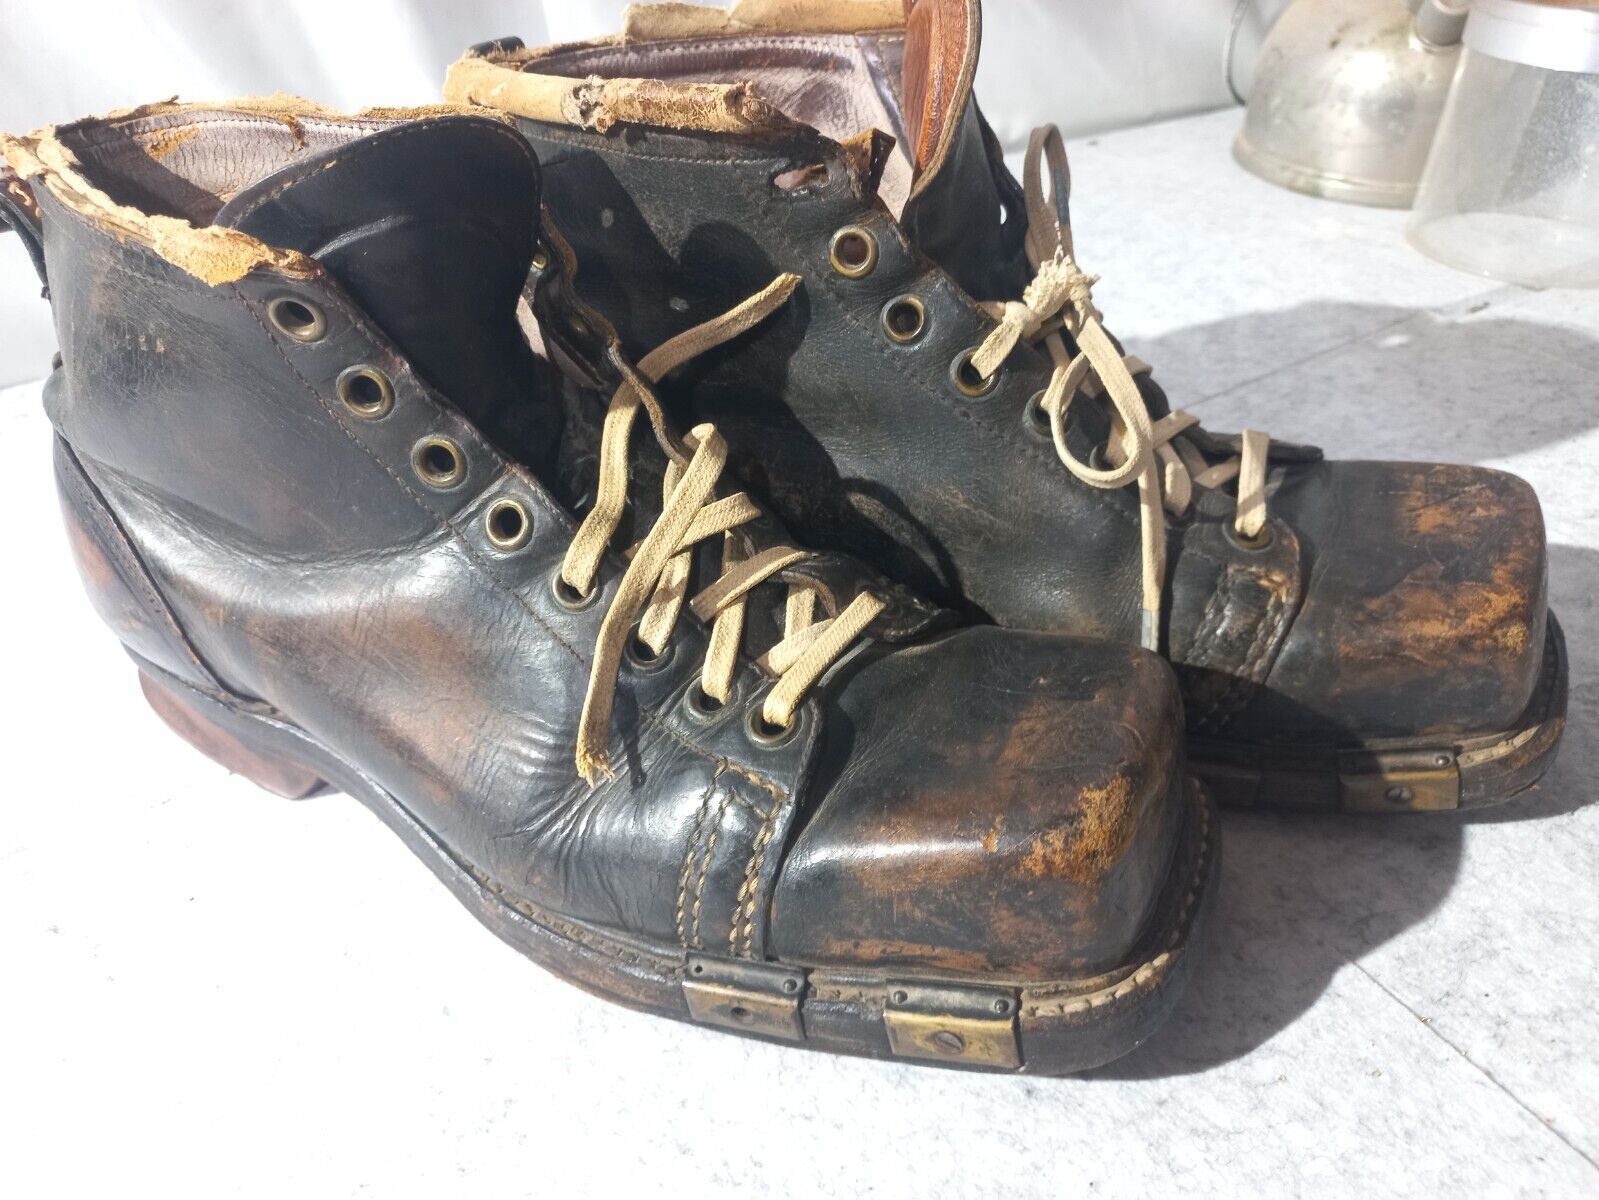 VTG 1940s WWII US Army Ski Trooper Army Military Boots Size 10.5 D Collectors